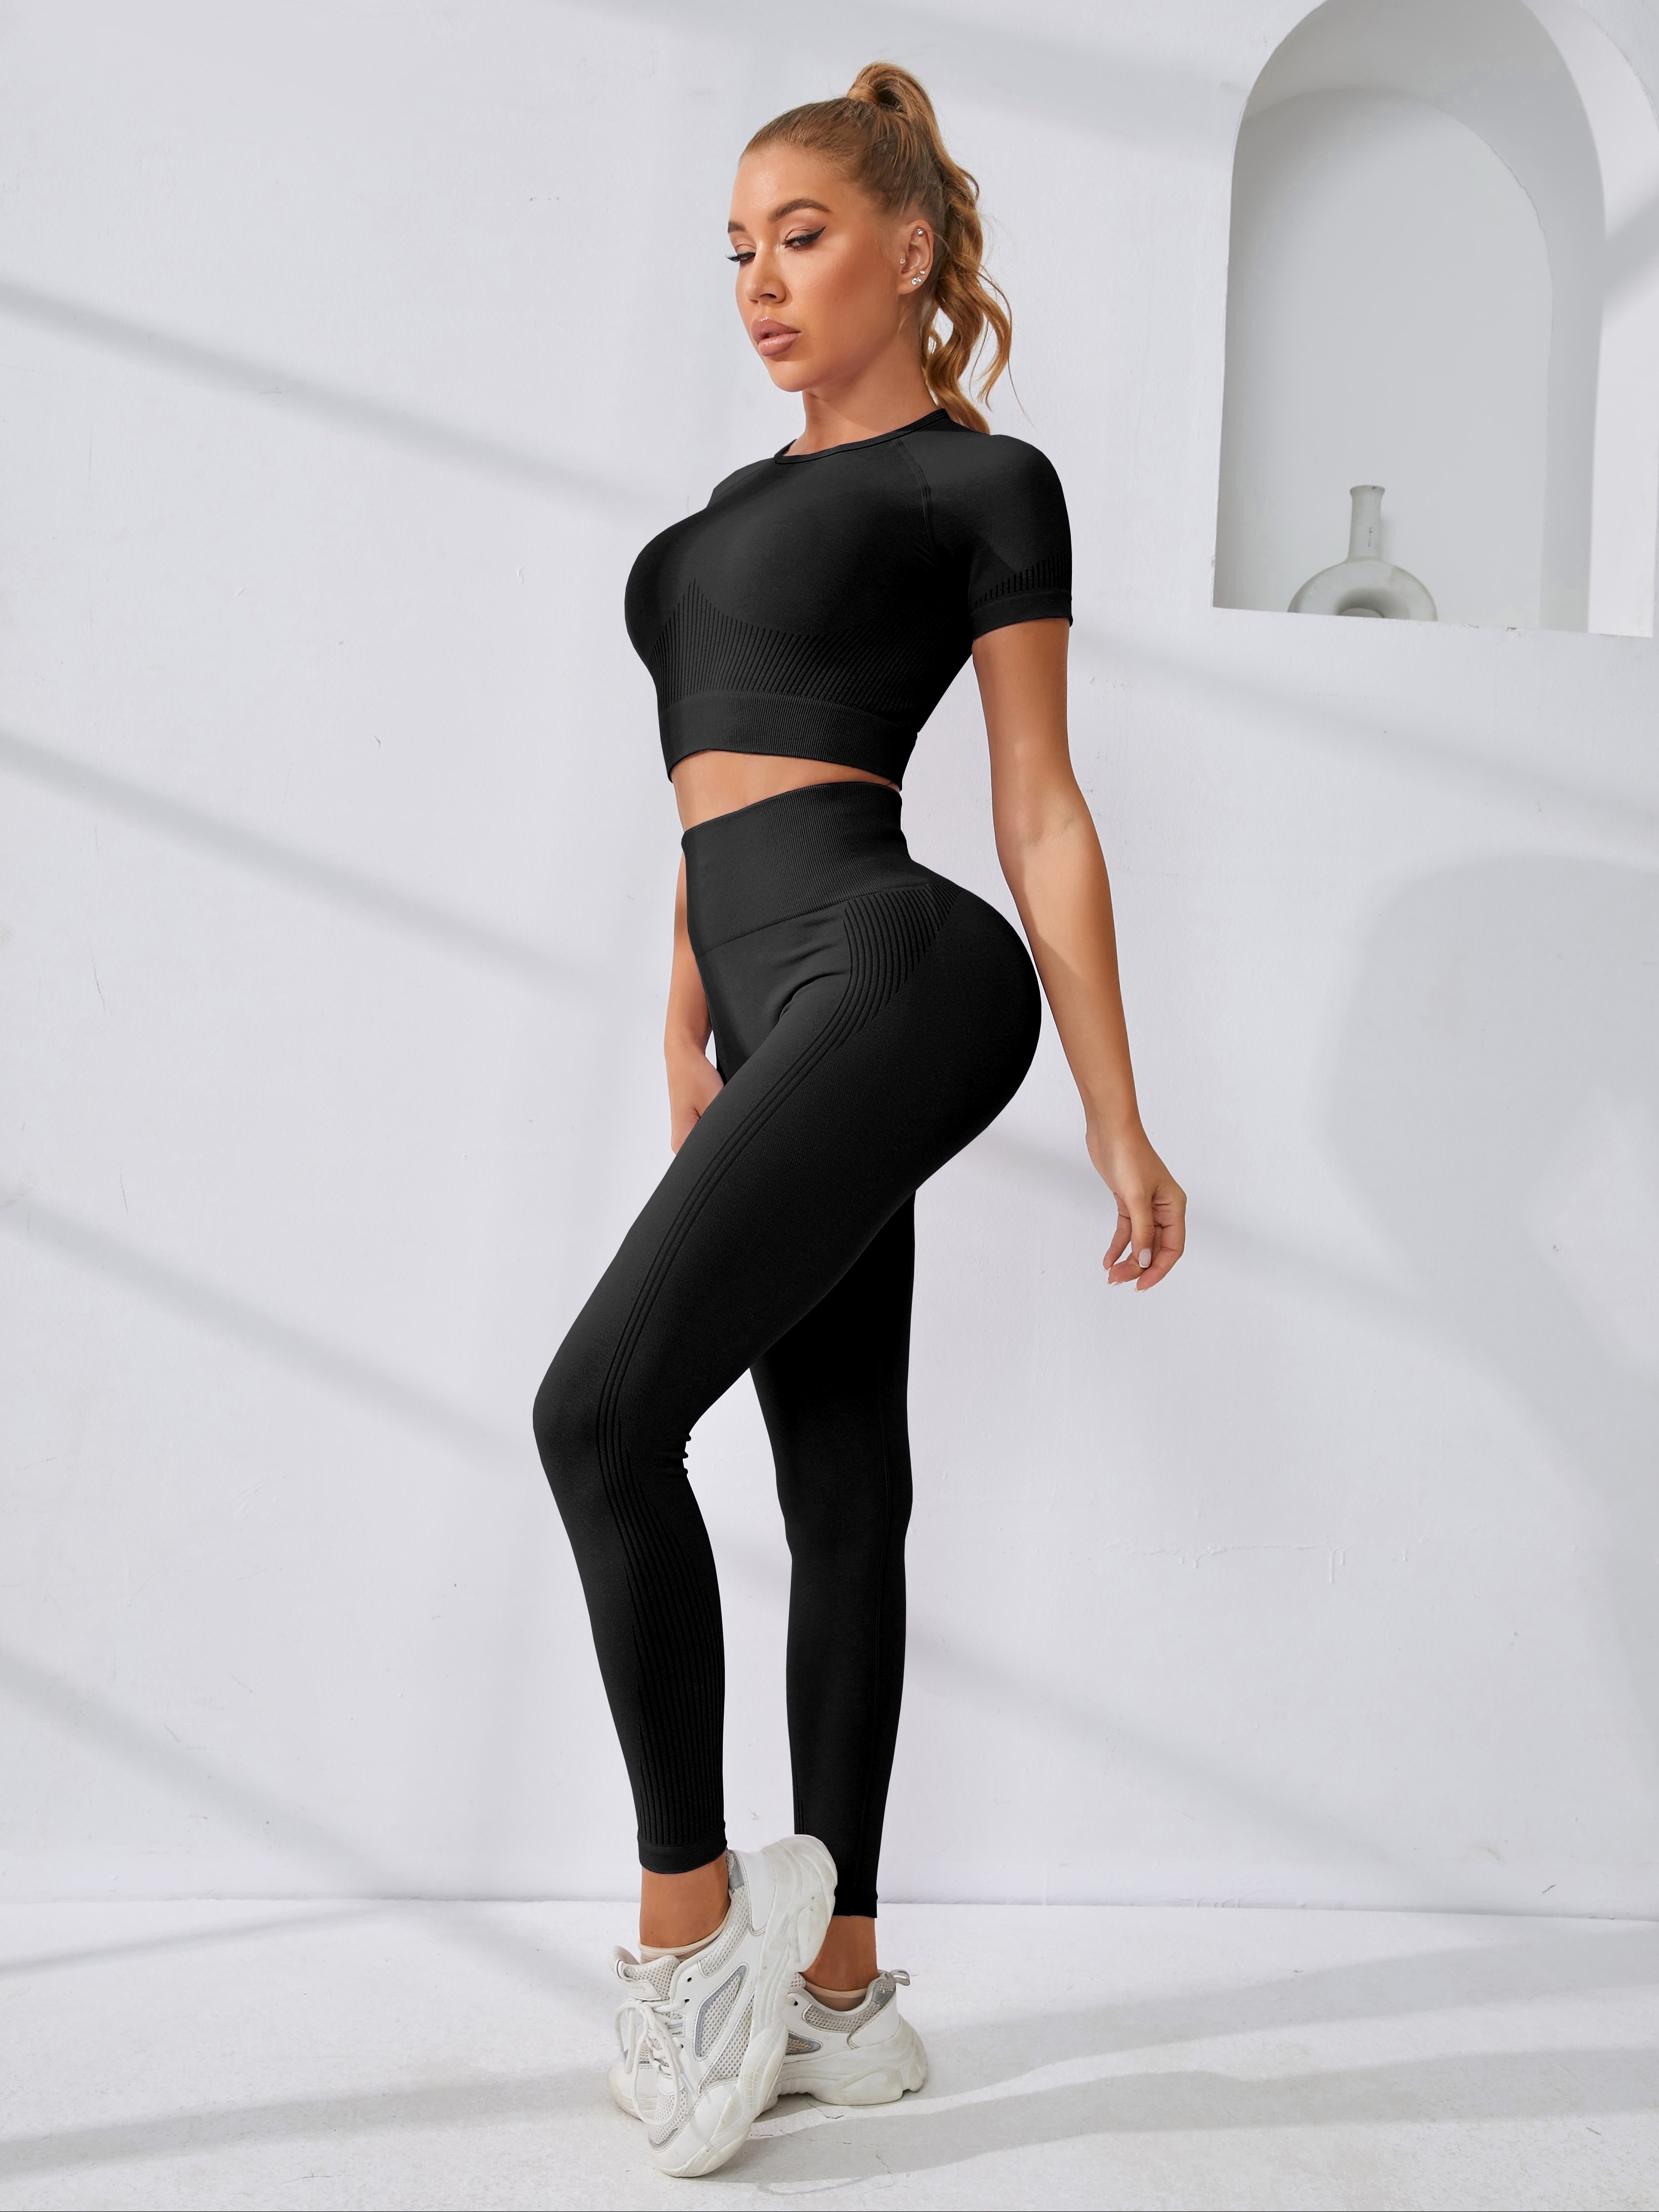 Eko-Ley Shop - These perfect, breathable, soft and comfortable Ladies Tops  are a perfect fit for All Women in all Sports, exercises and yoga events.  Enjoy the perfect look and feel of